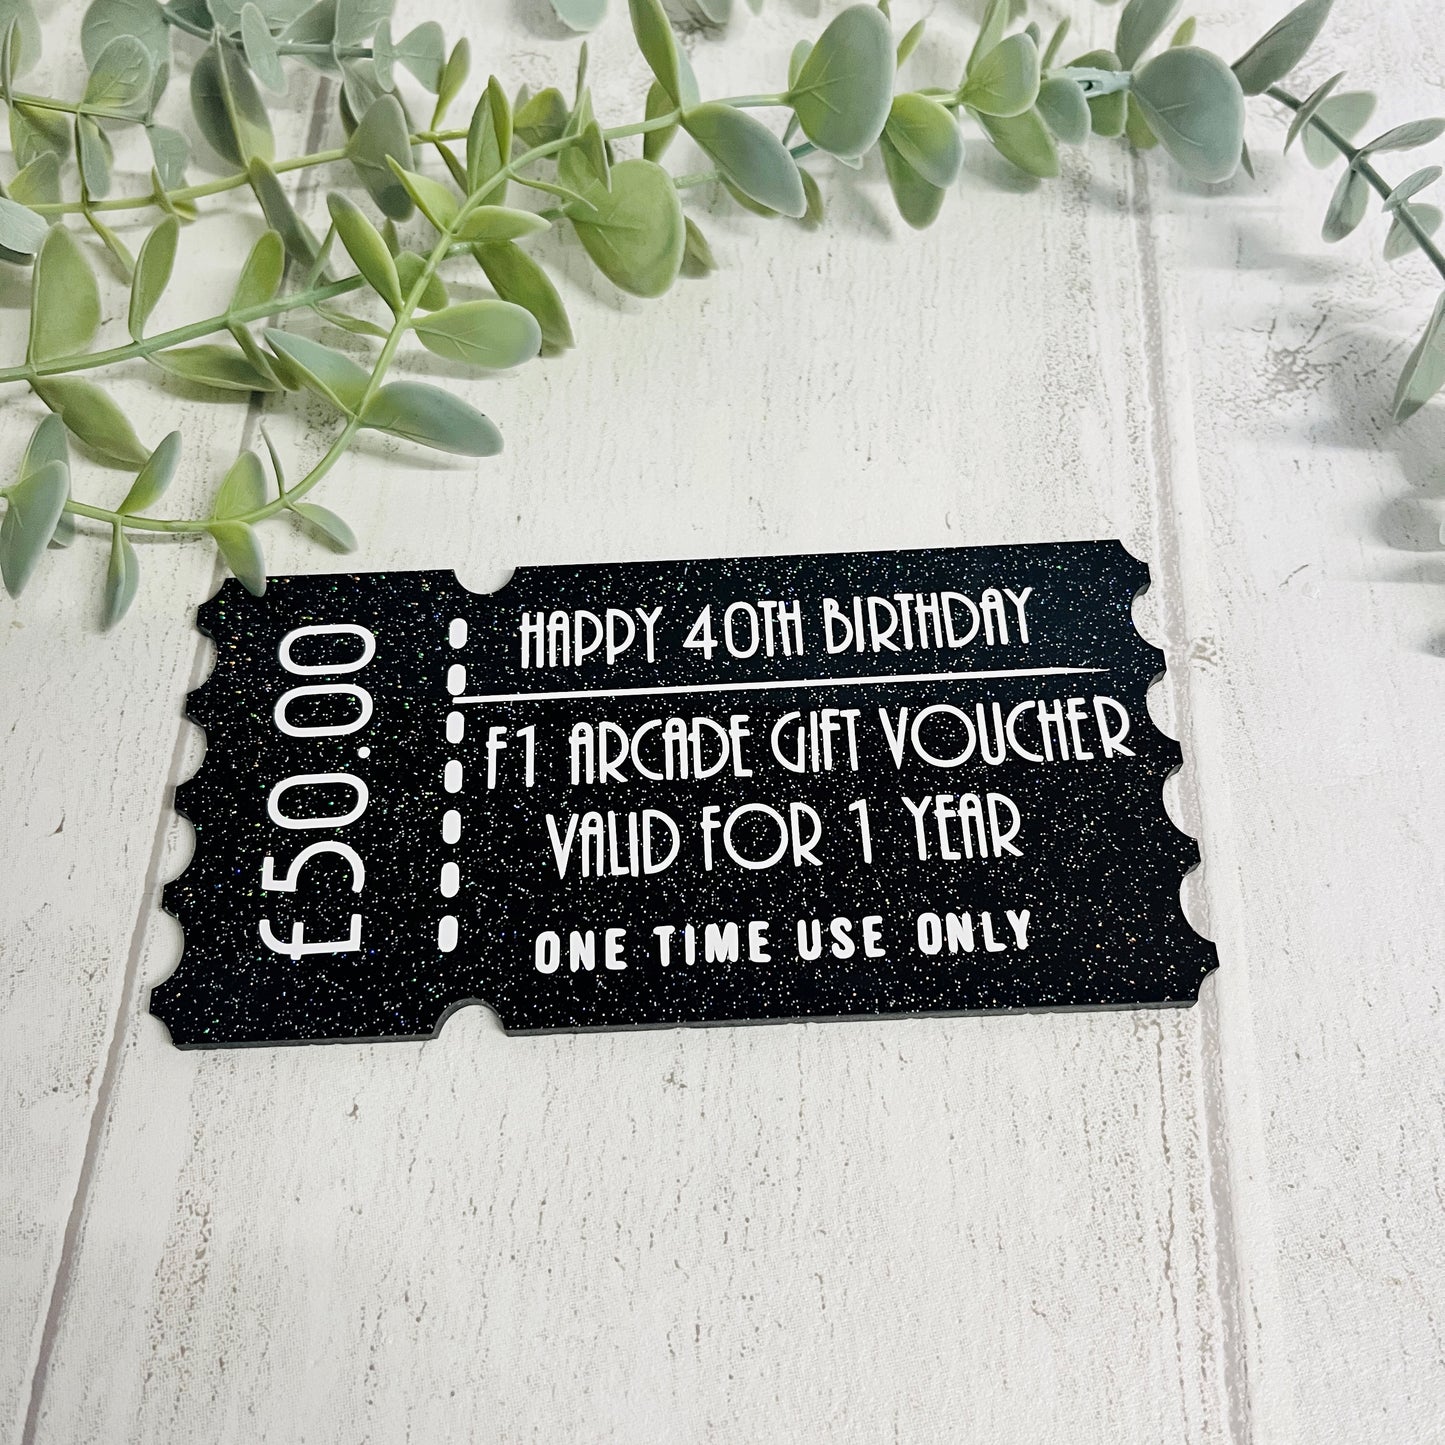 Personalised Keepsake Fake Acrylic Tickets for Birthday Gifts, Event Reveal Ticket, Gift Voucher